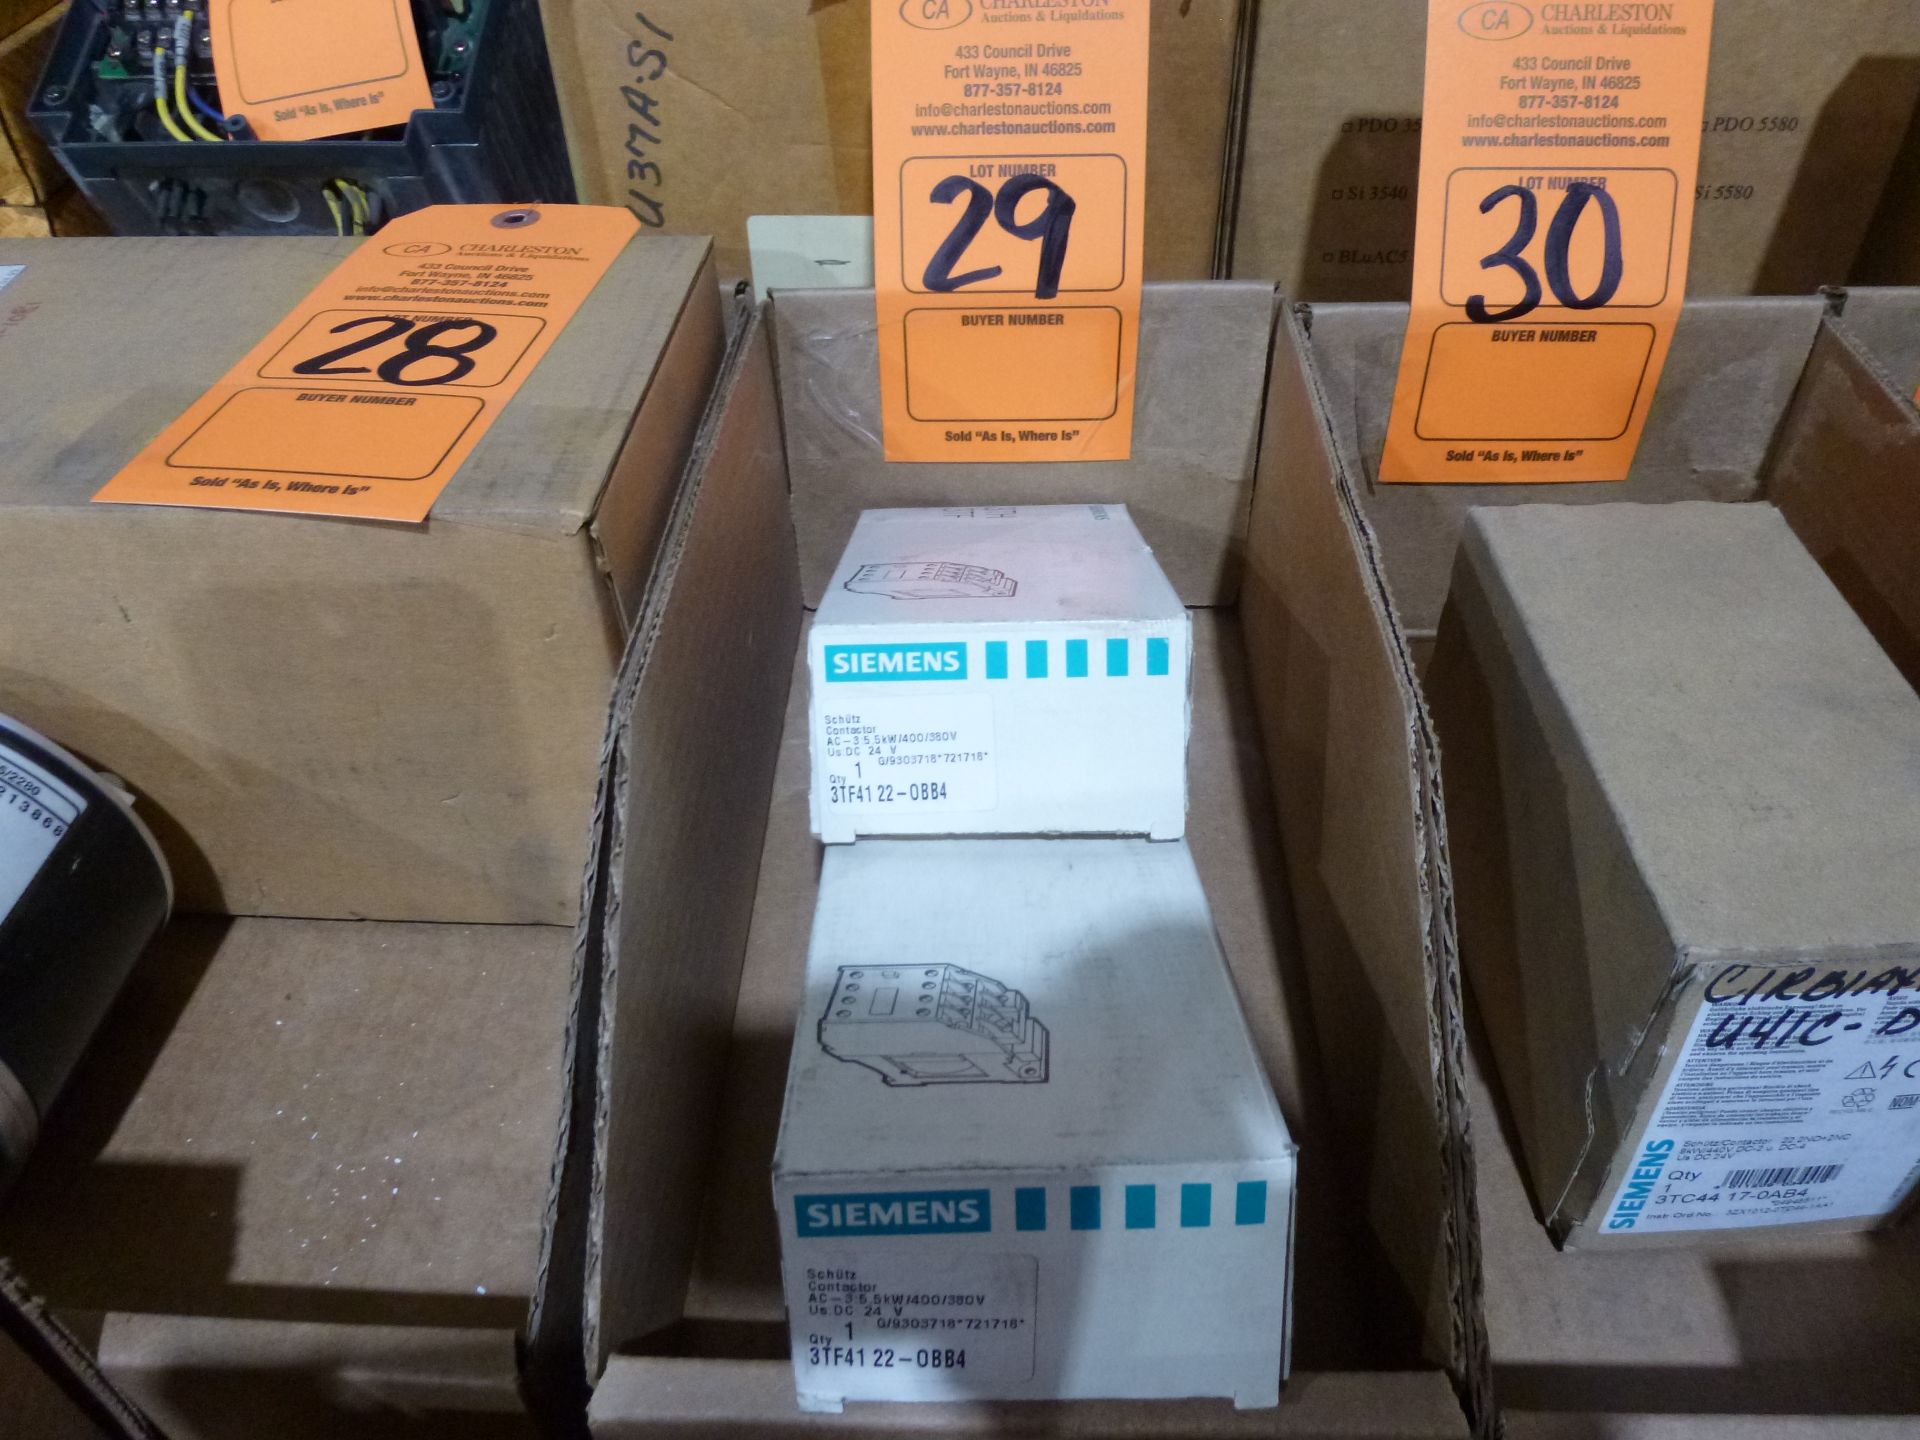 Qty 2 Siemens Model 3tf4122-0bb4, new in boxes, as always with Brolyn LLC auctions, all lots can